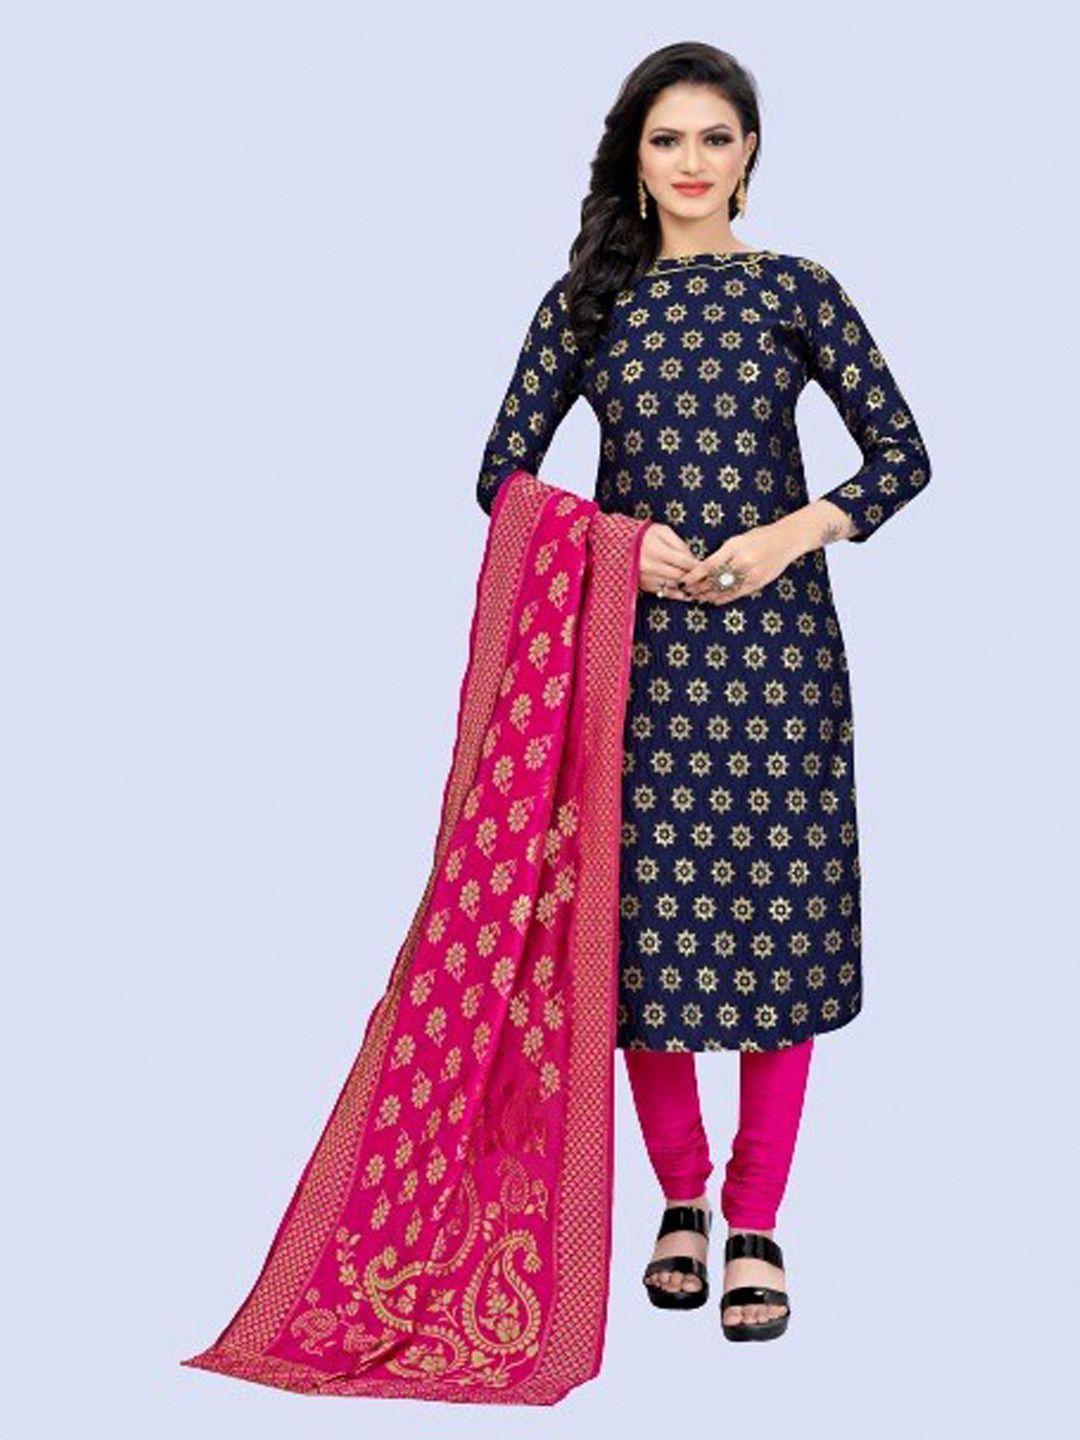 morly women navy blue & pink dupion silk unstitched dress material